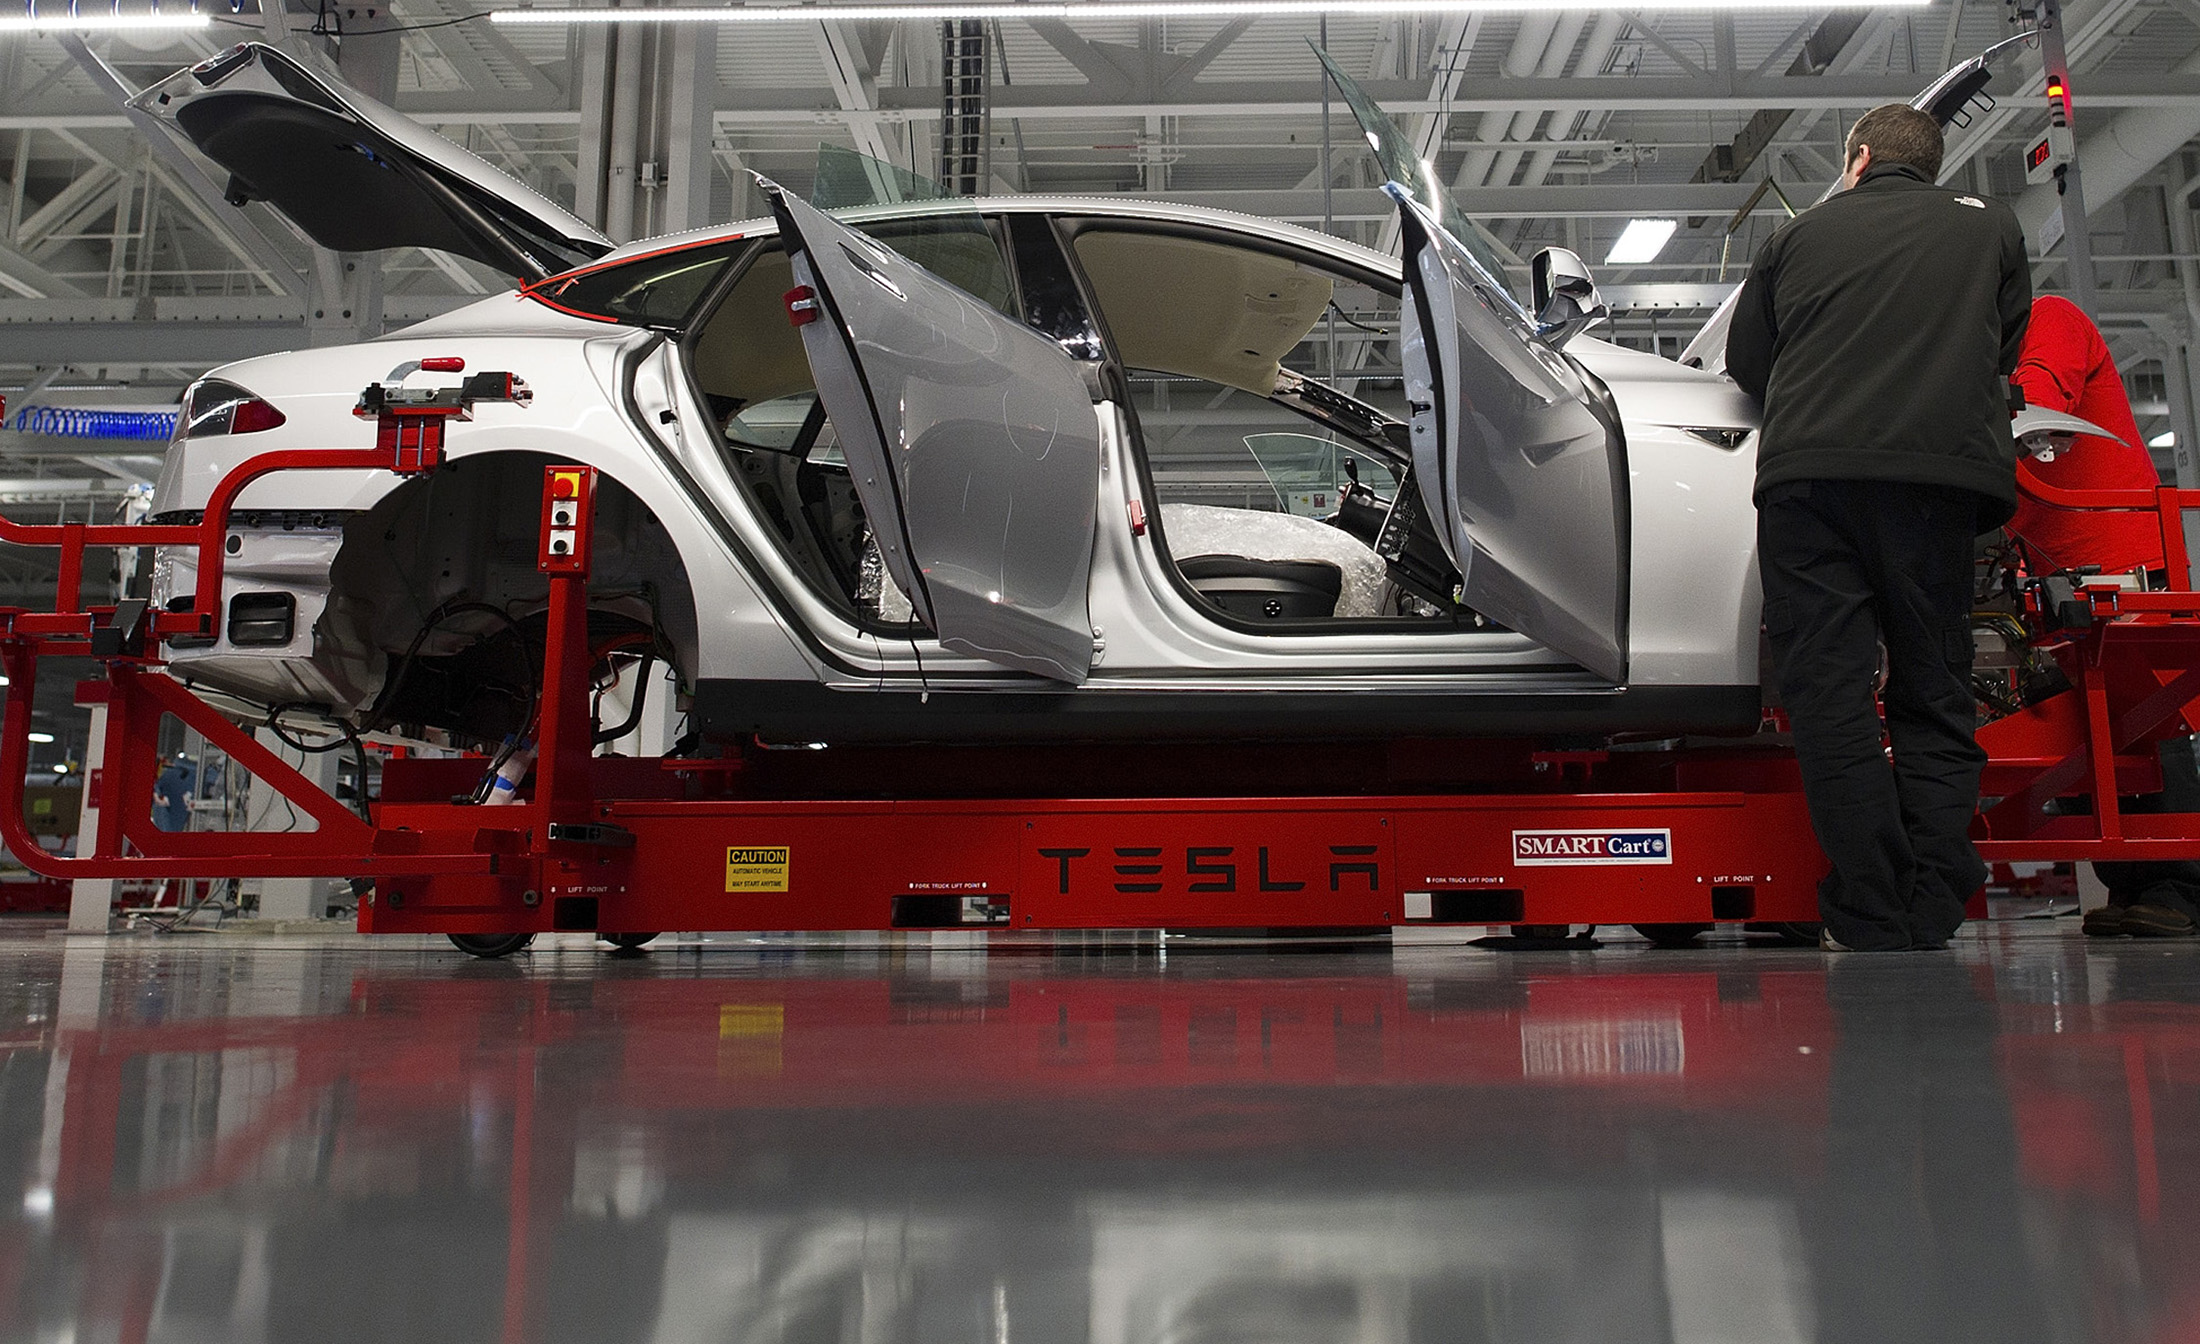 Tesla associates work on the Model S electric car at the company's factory in Fremont, California.
